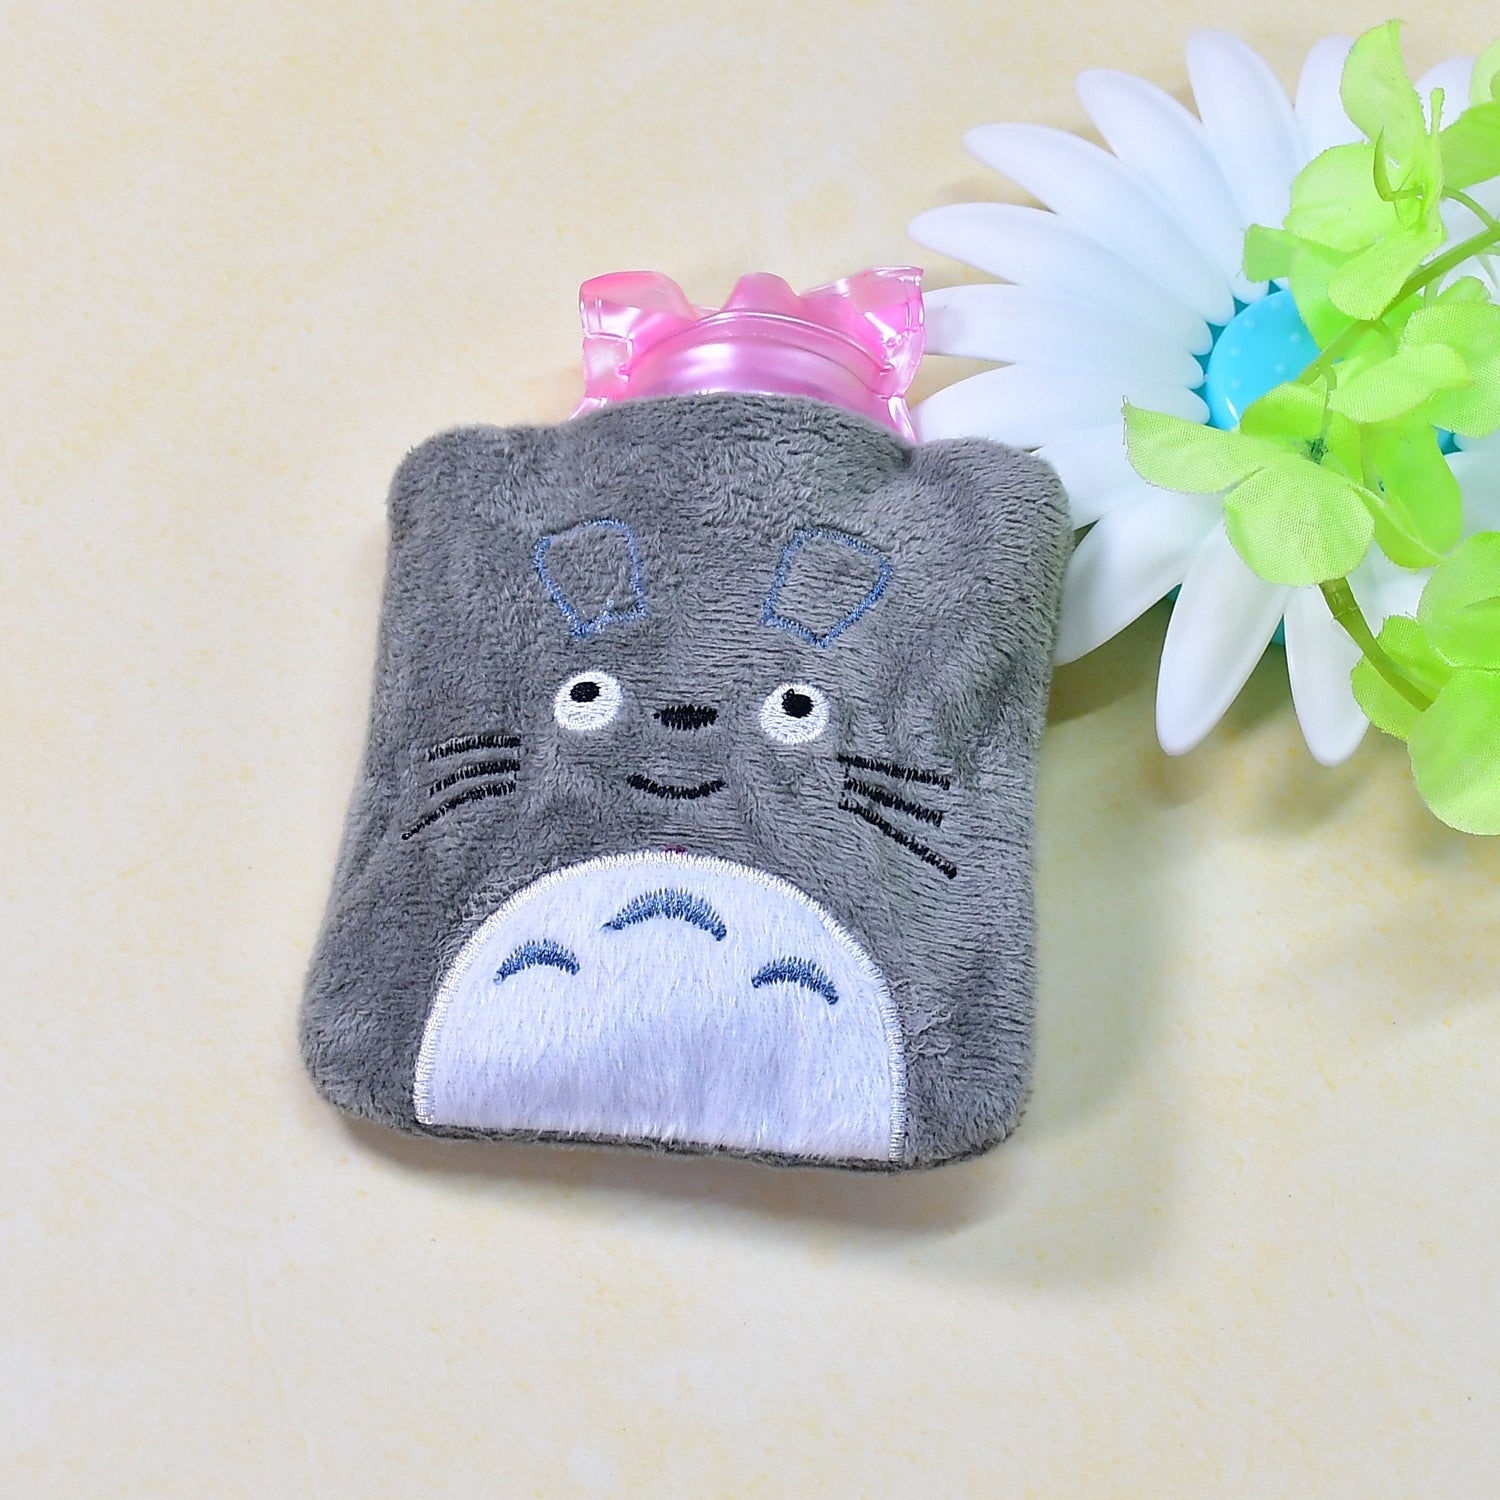 6531 Totoro Cartoon Hot Water Bag small Hot Water Bag with Cover for Pain Relief, Neck, Shoulder Pain and Hand, Feet Warmer, Menstrual Cramps. DeoDap